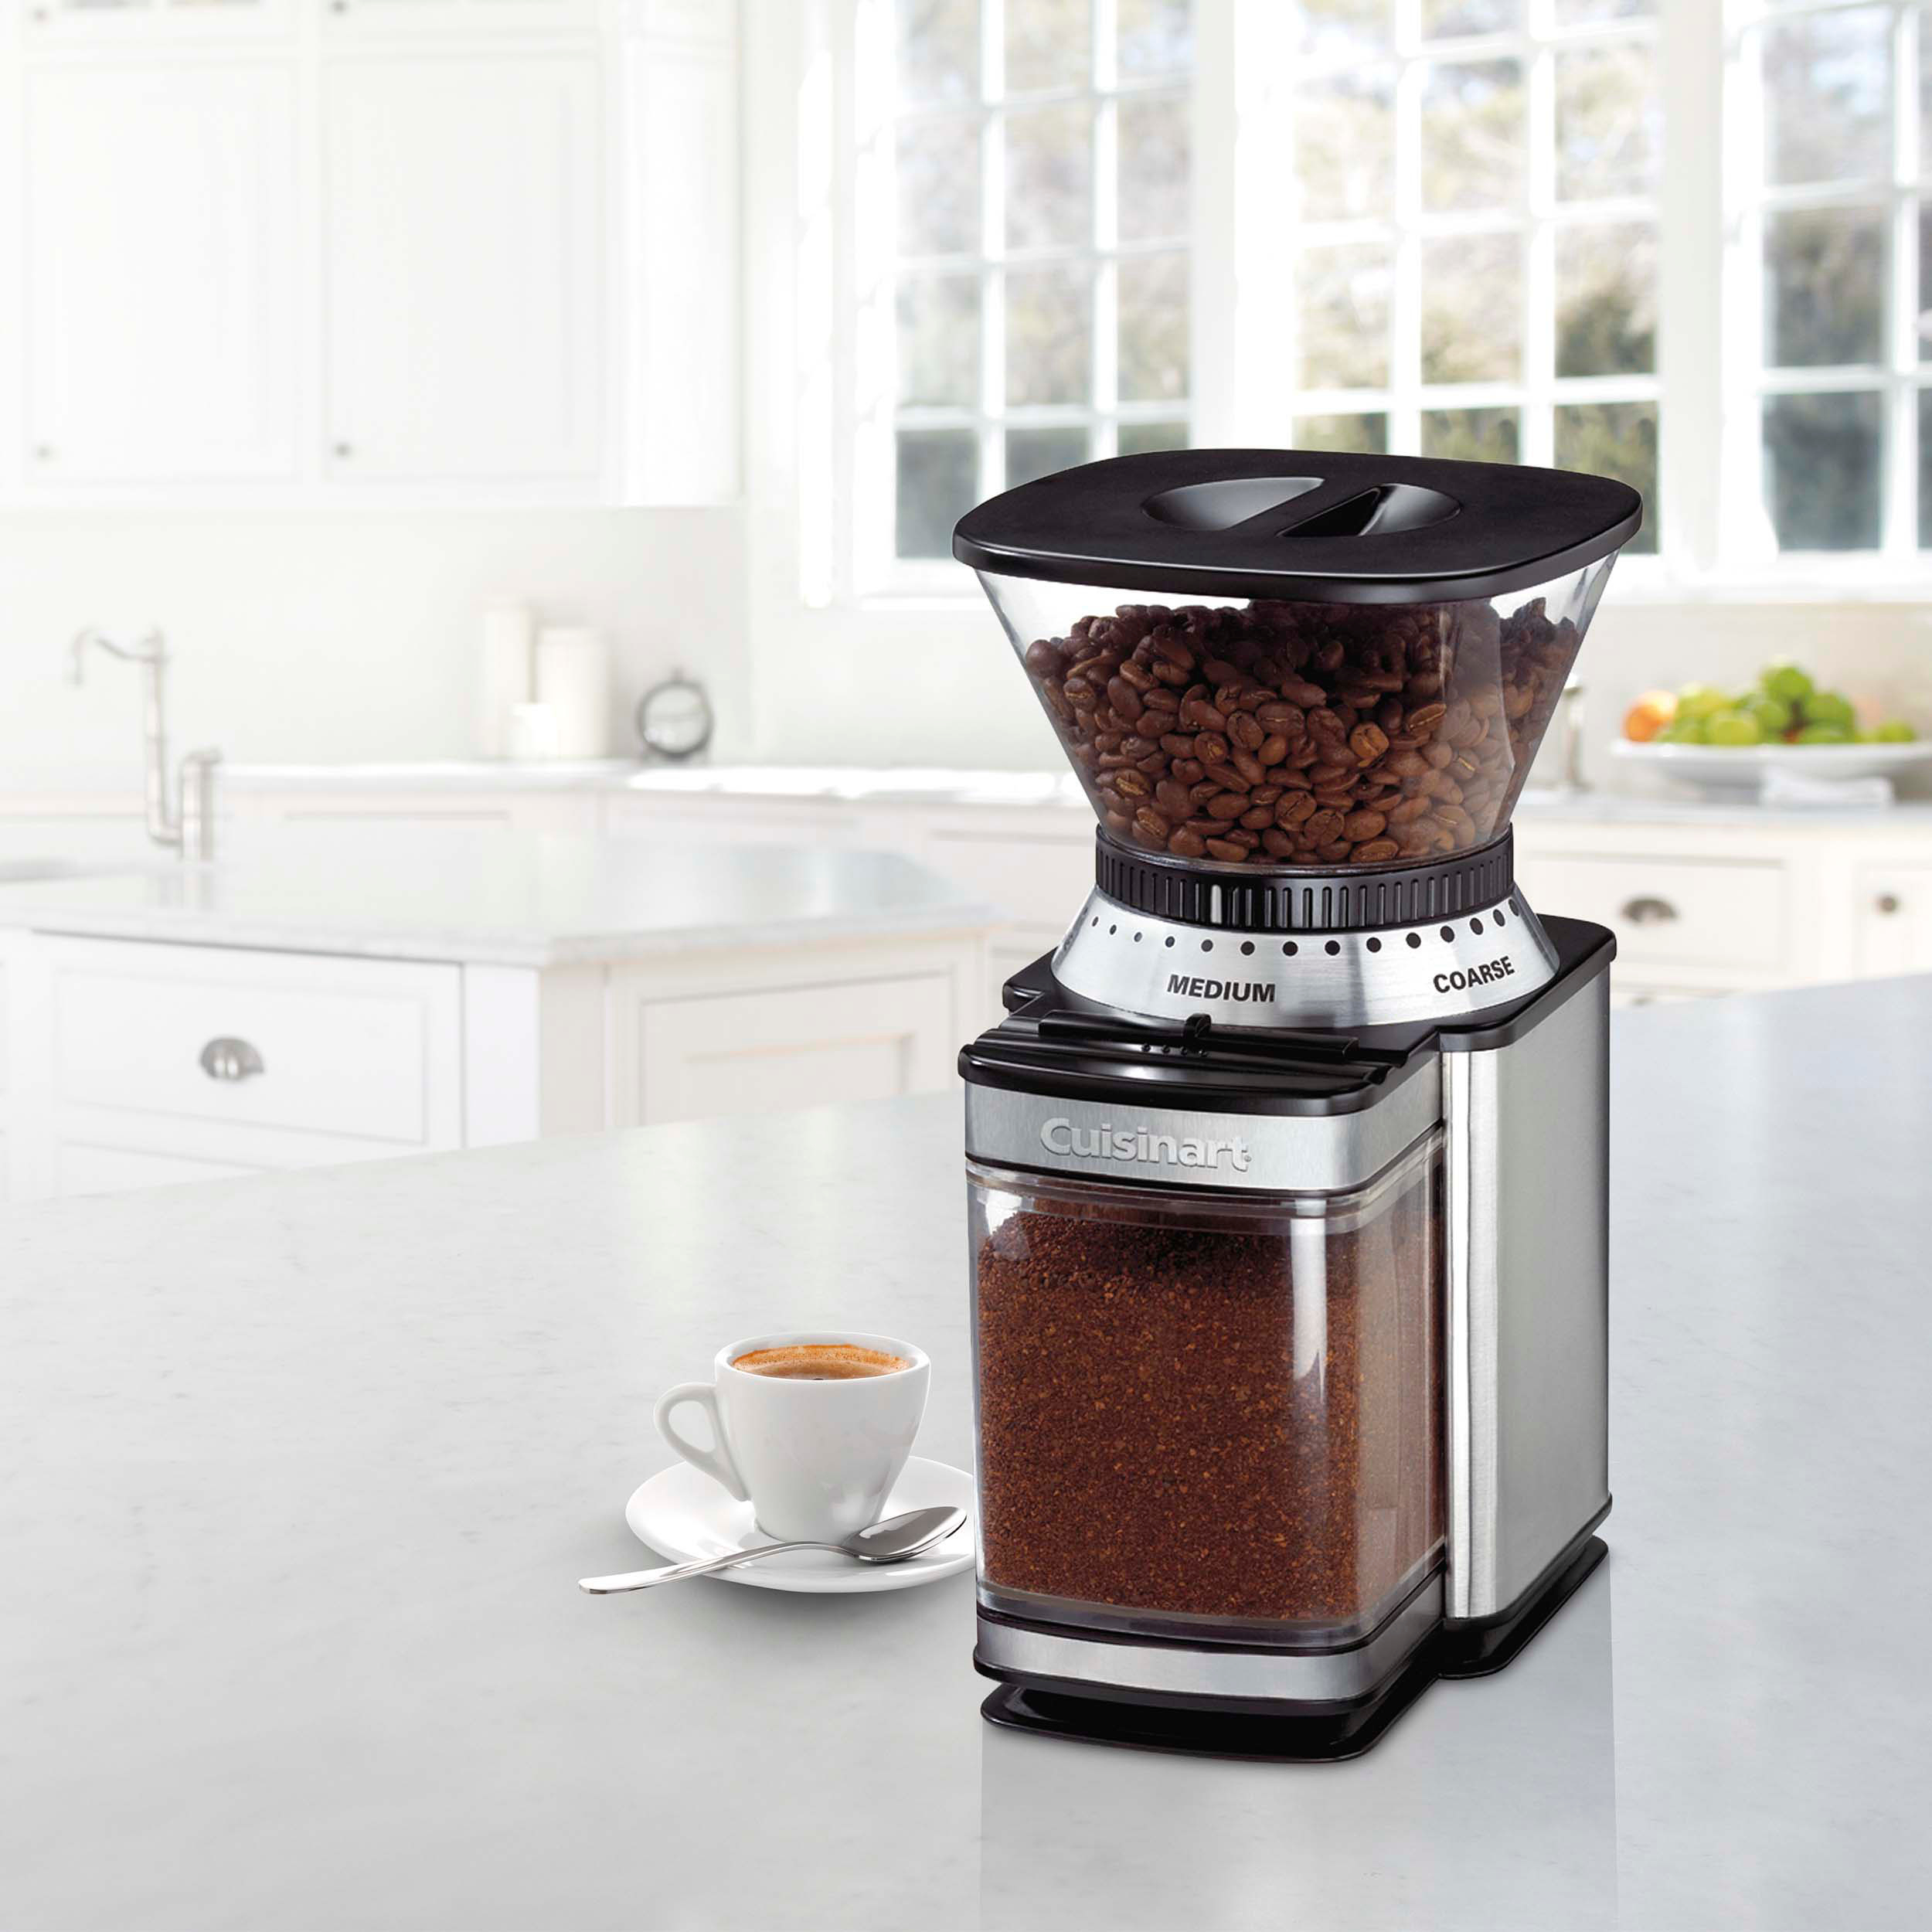 Cuisinart Supreme Grind Automatic Burr Coffee Grinder + Reviews